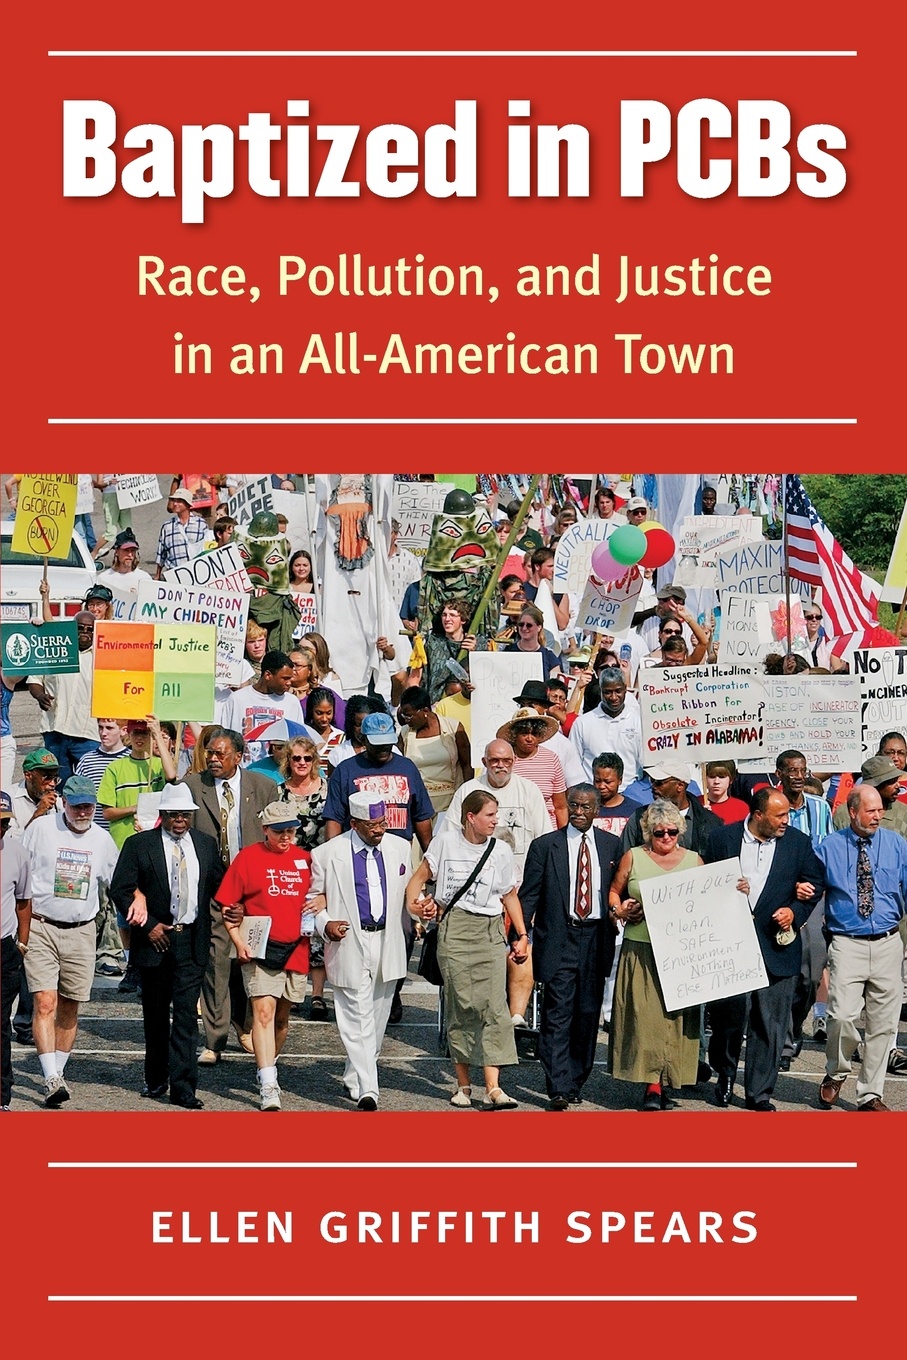 Baptized in PCBs. Race, Pollution, and Justice in an All-American Town